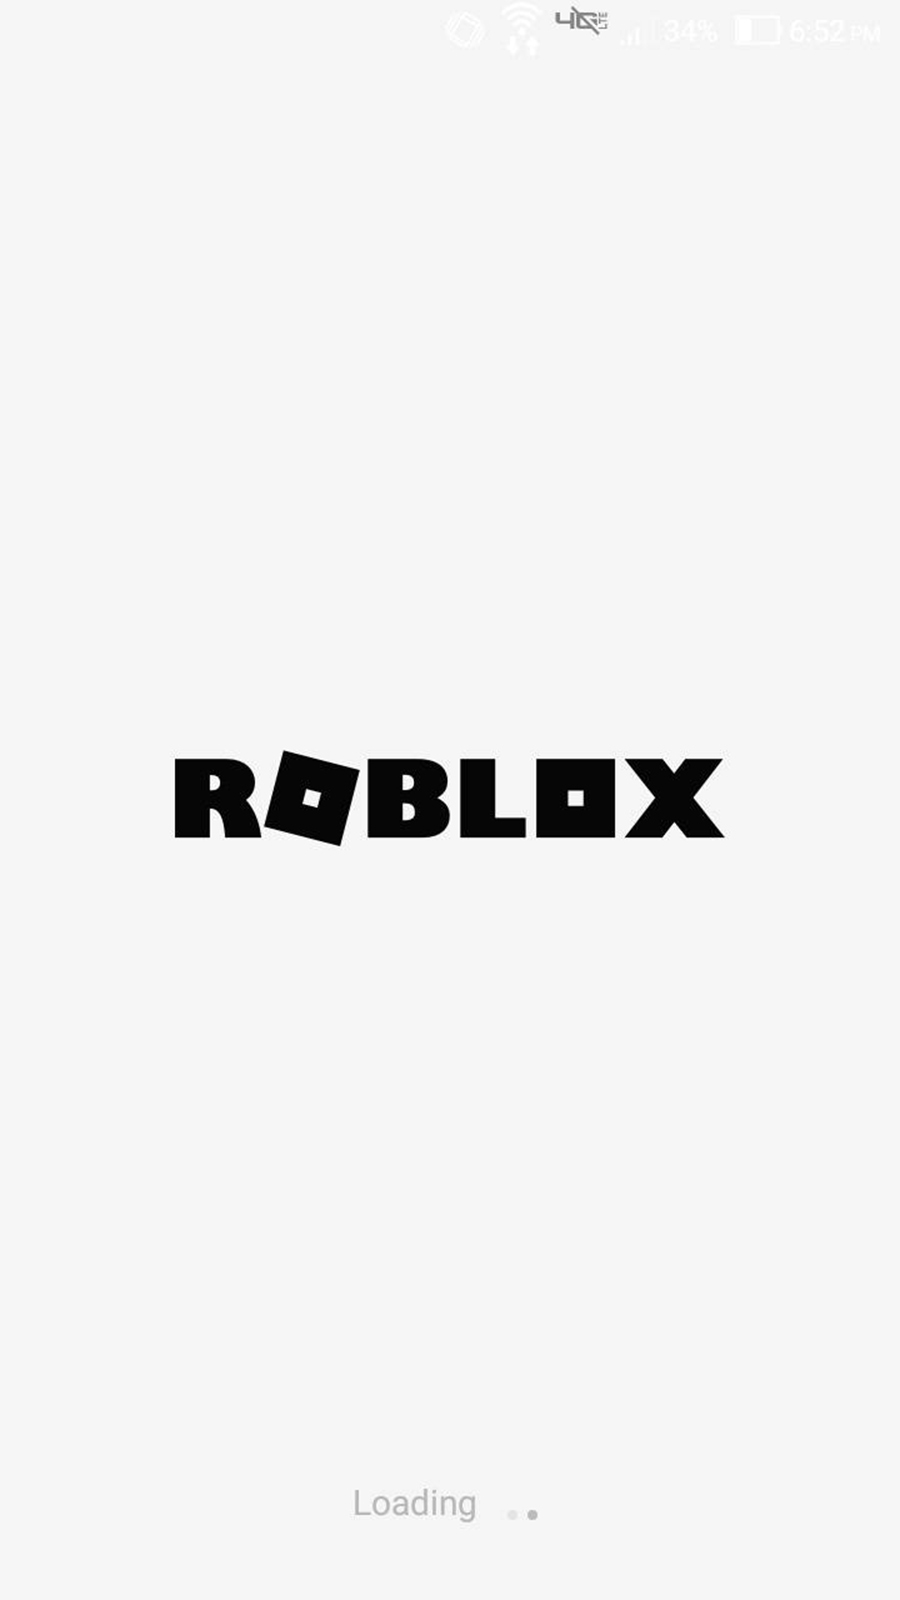 Roblox Roblox Game Wallpapers Now Download For Your Device Best Wallpapers - best roblox device